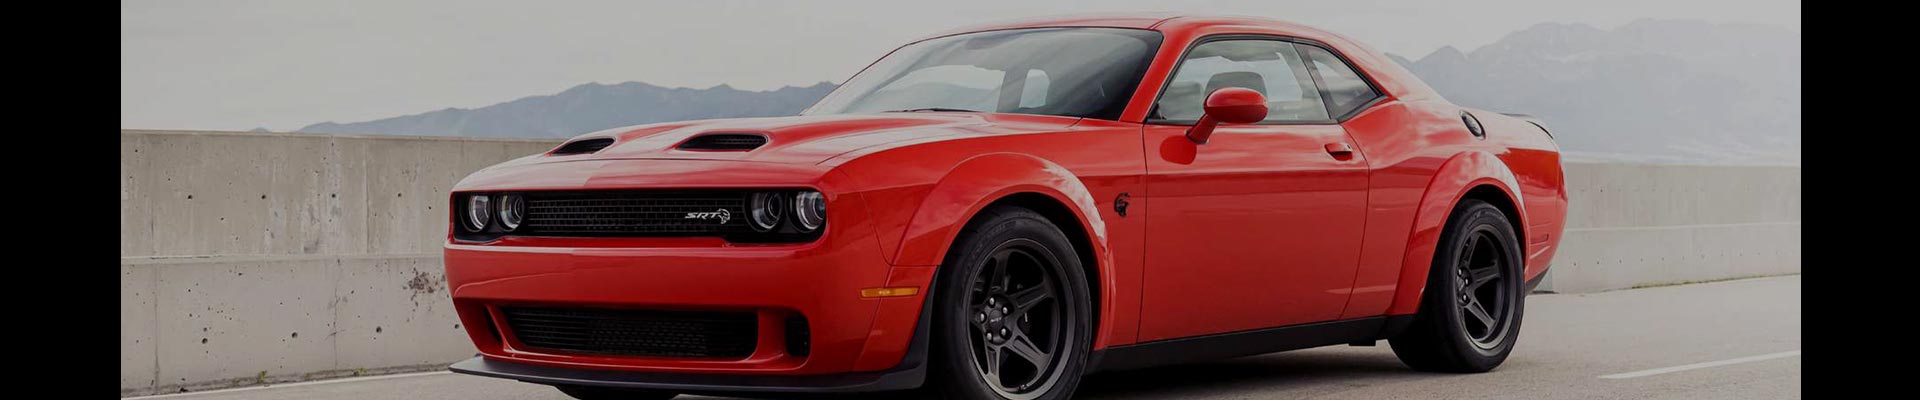 Shop Replacement and OEM 2014 Dodge Challenger Parts with Discounted Price on the Net